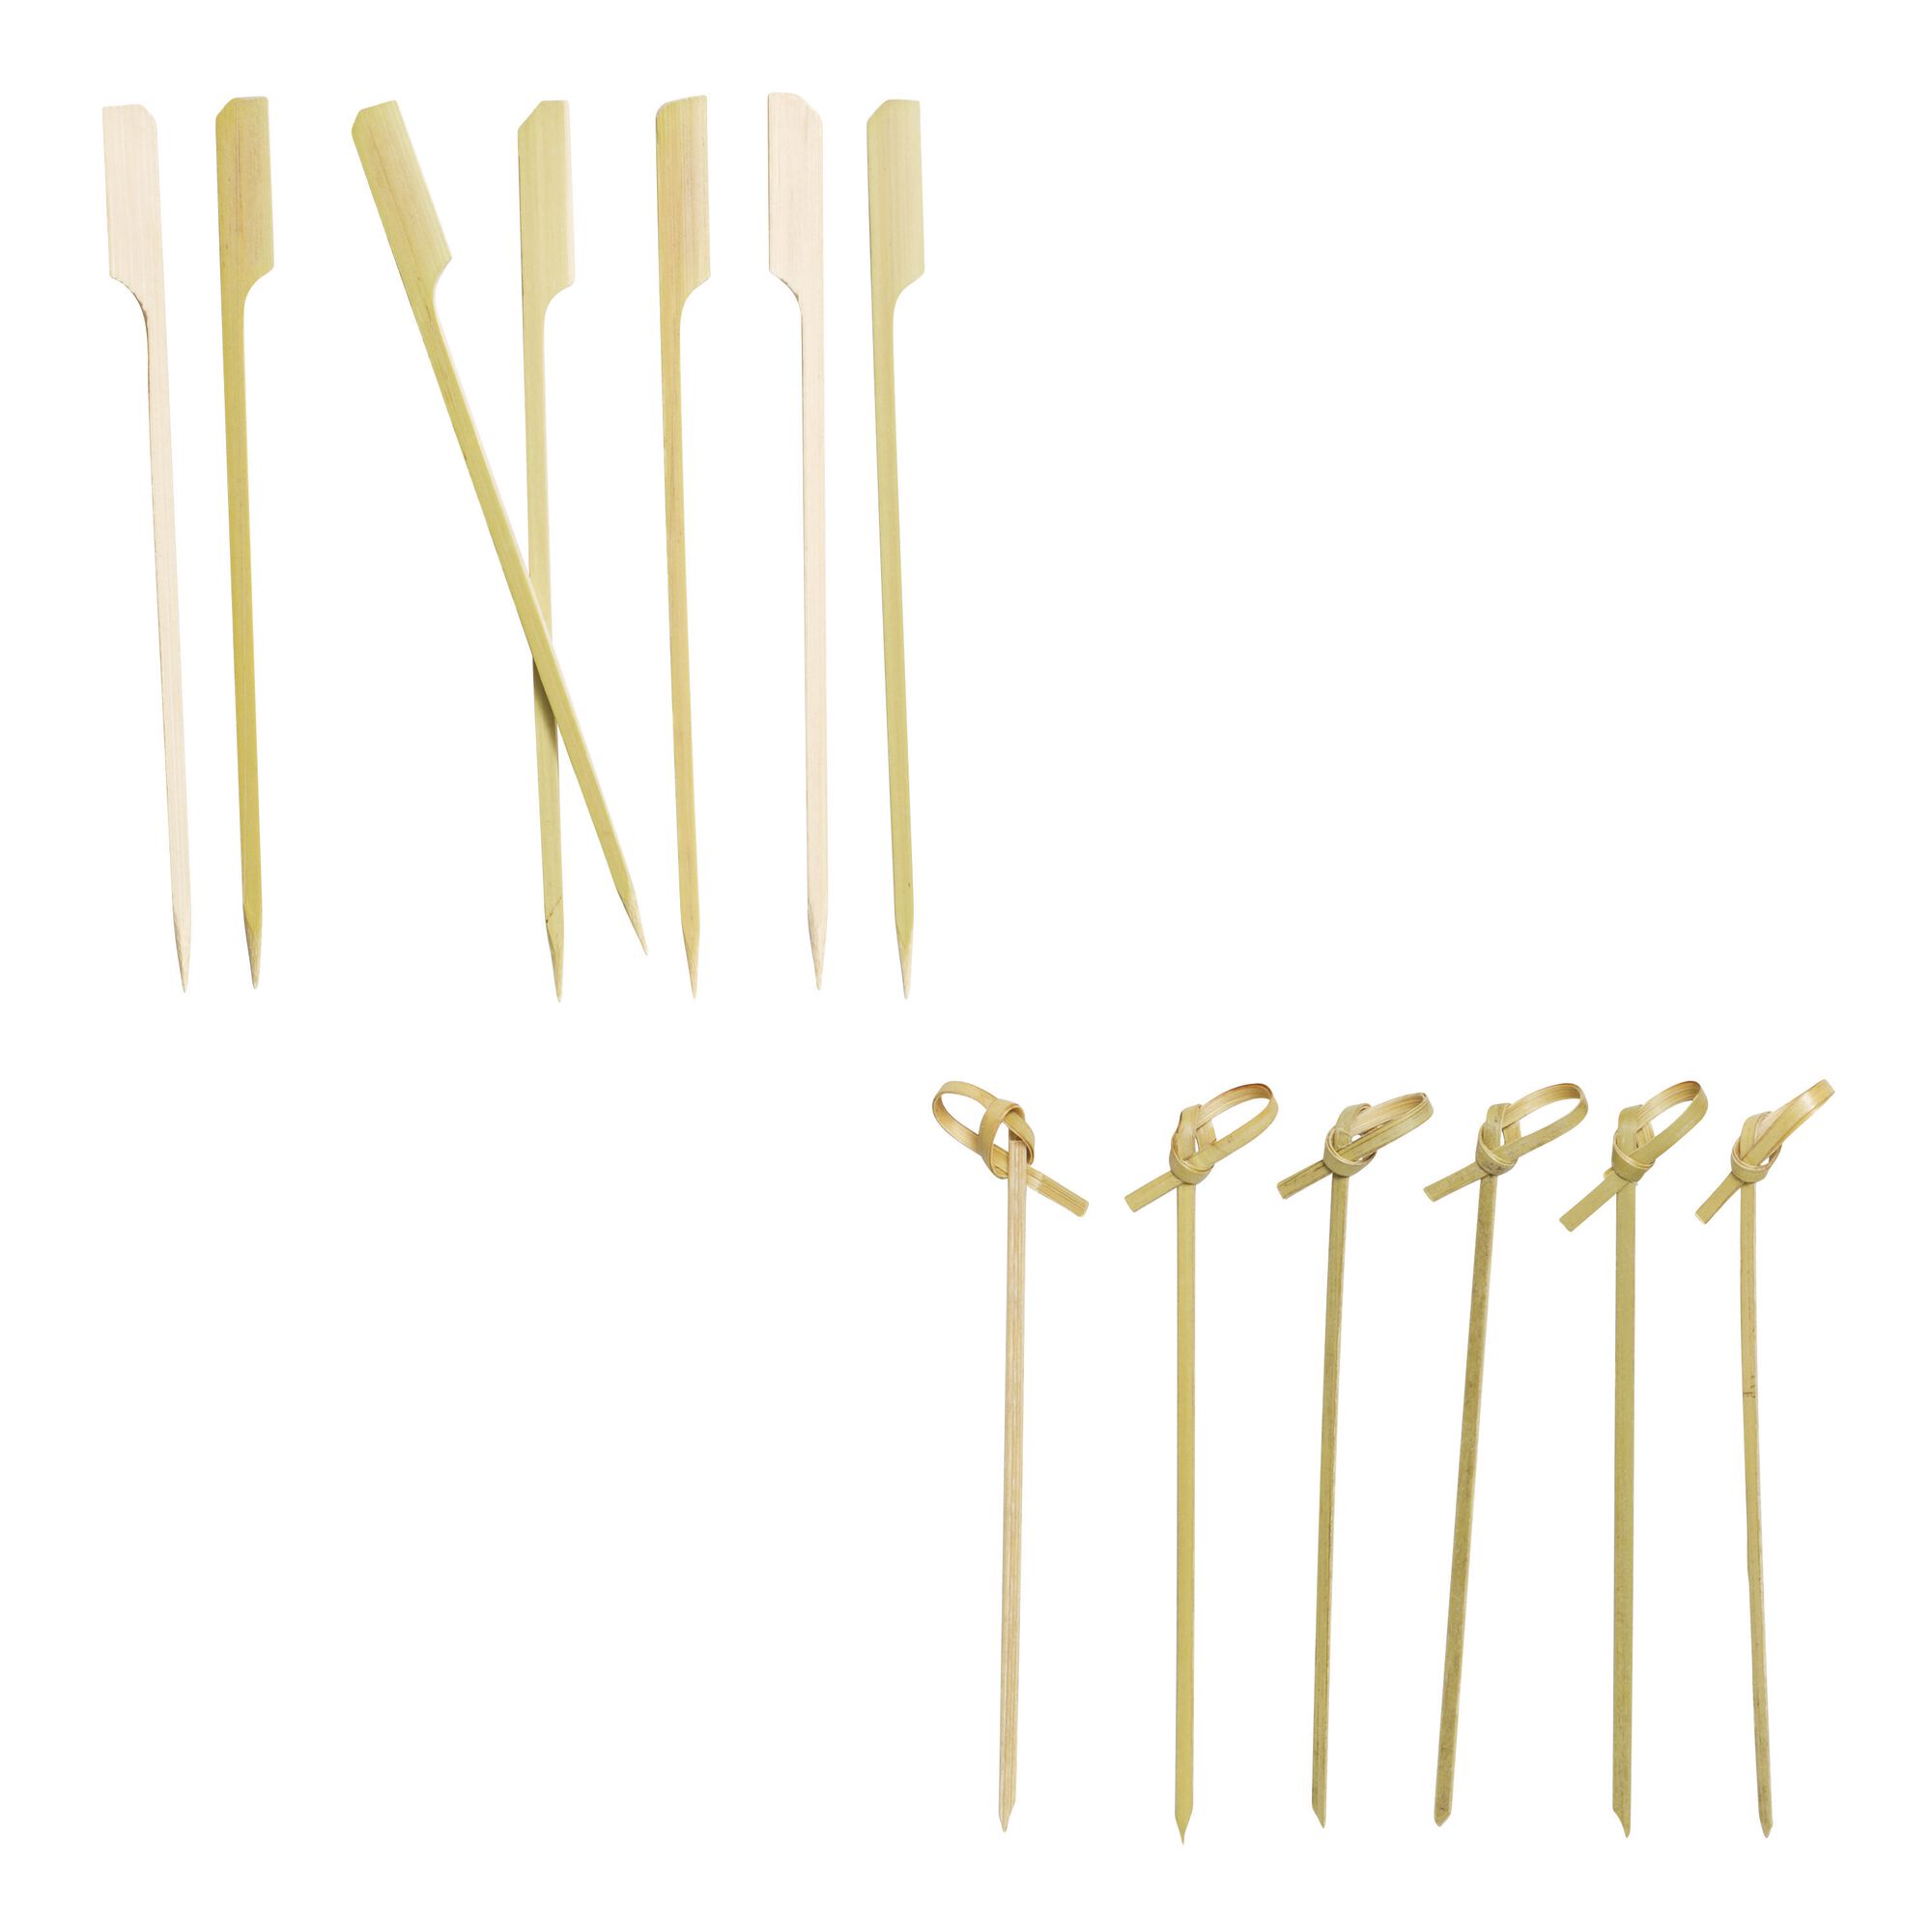 Bamboo Knot Picks or Skewers - World Market